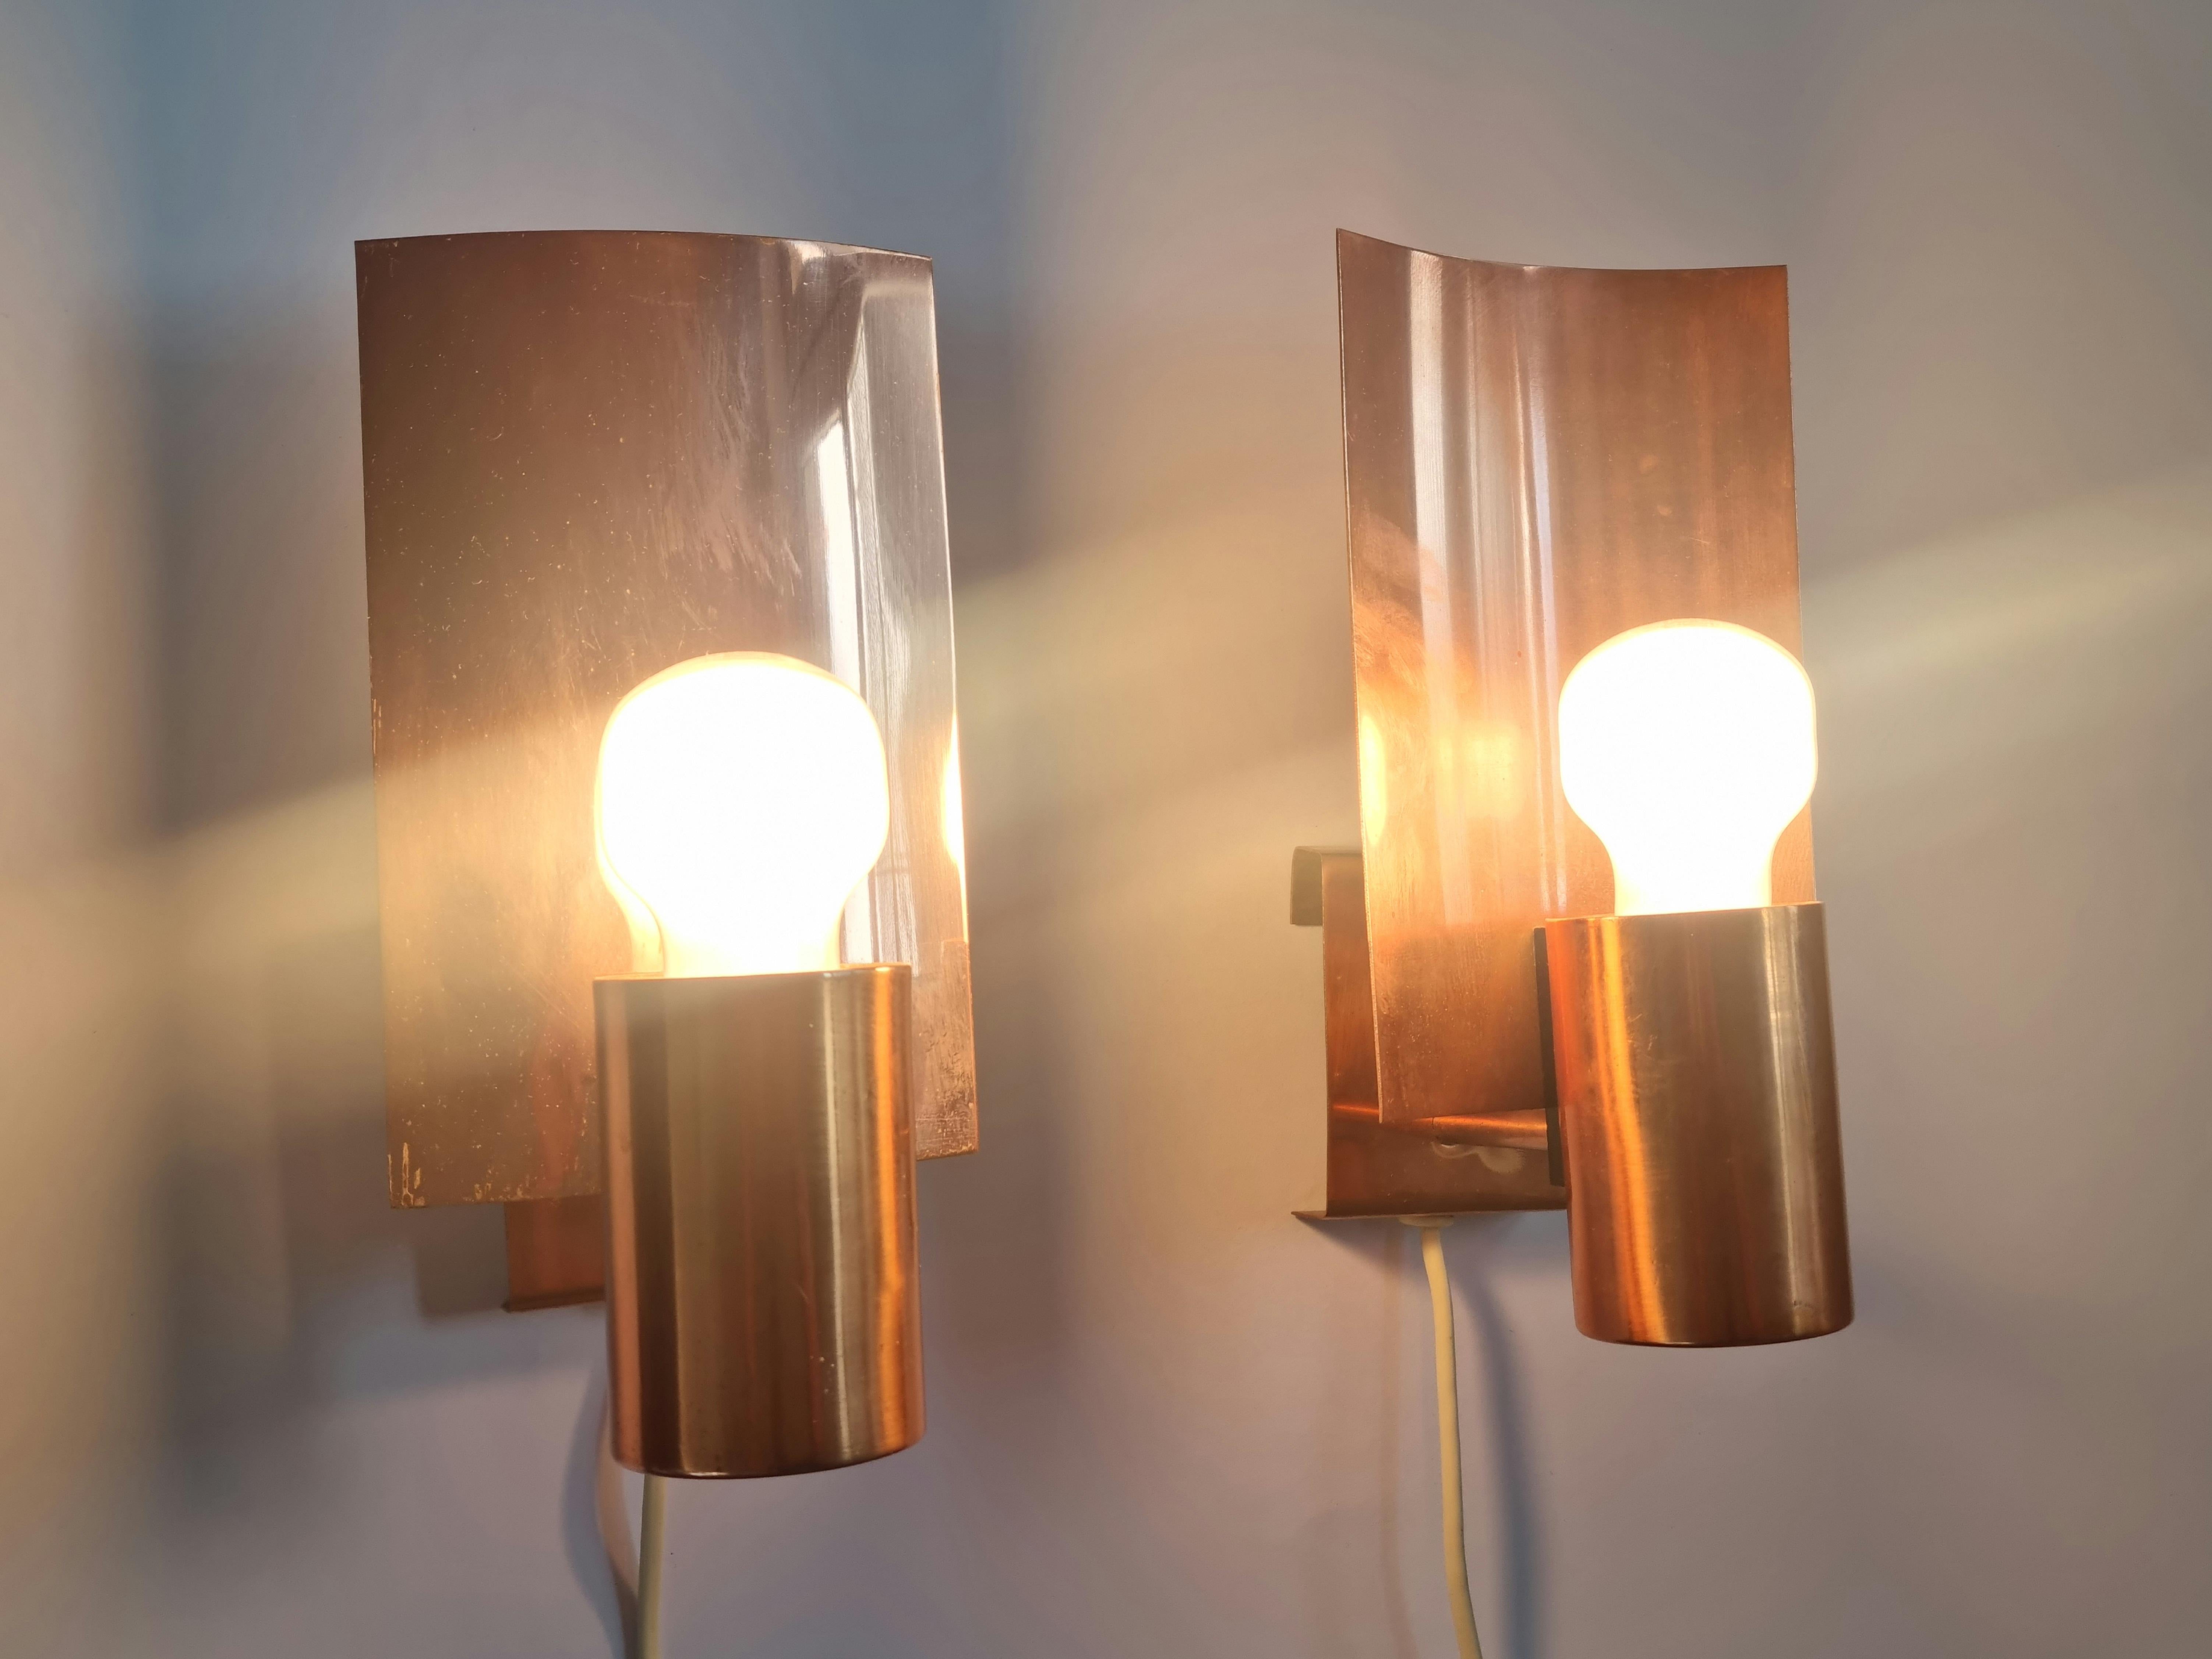 Pair of Midcentury Copper Wall Lamps, Denmark, 1960s For Sale 13